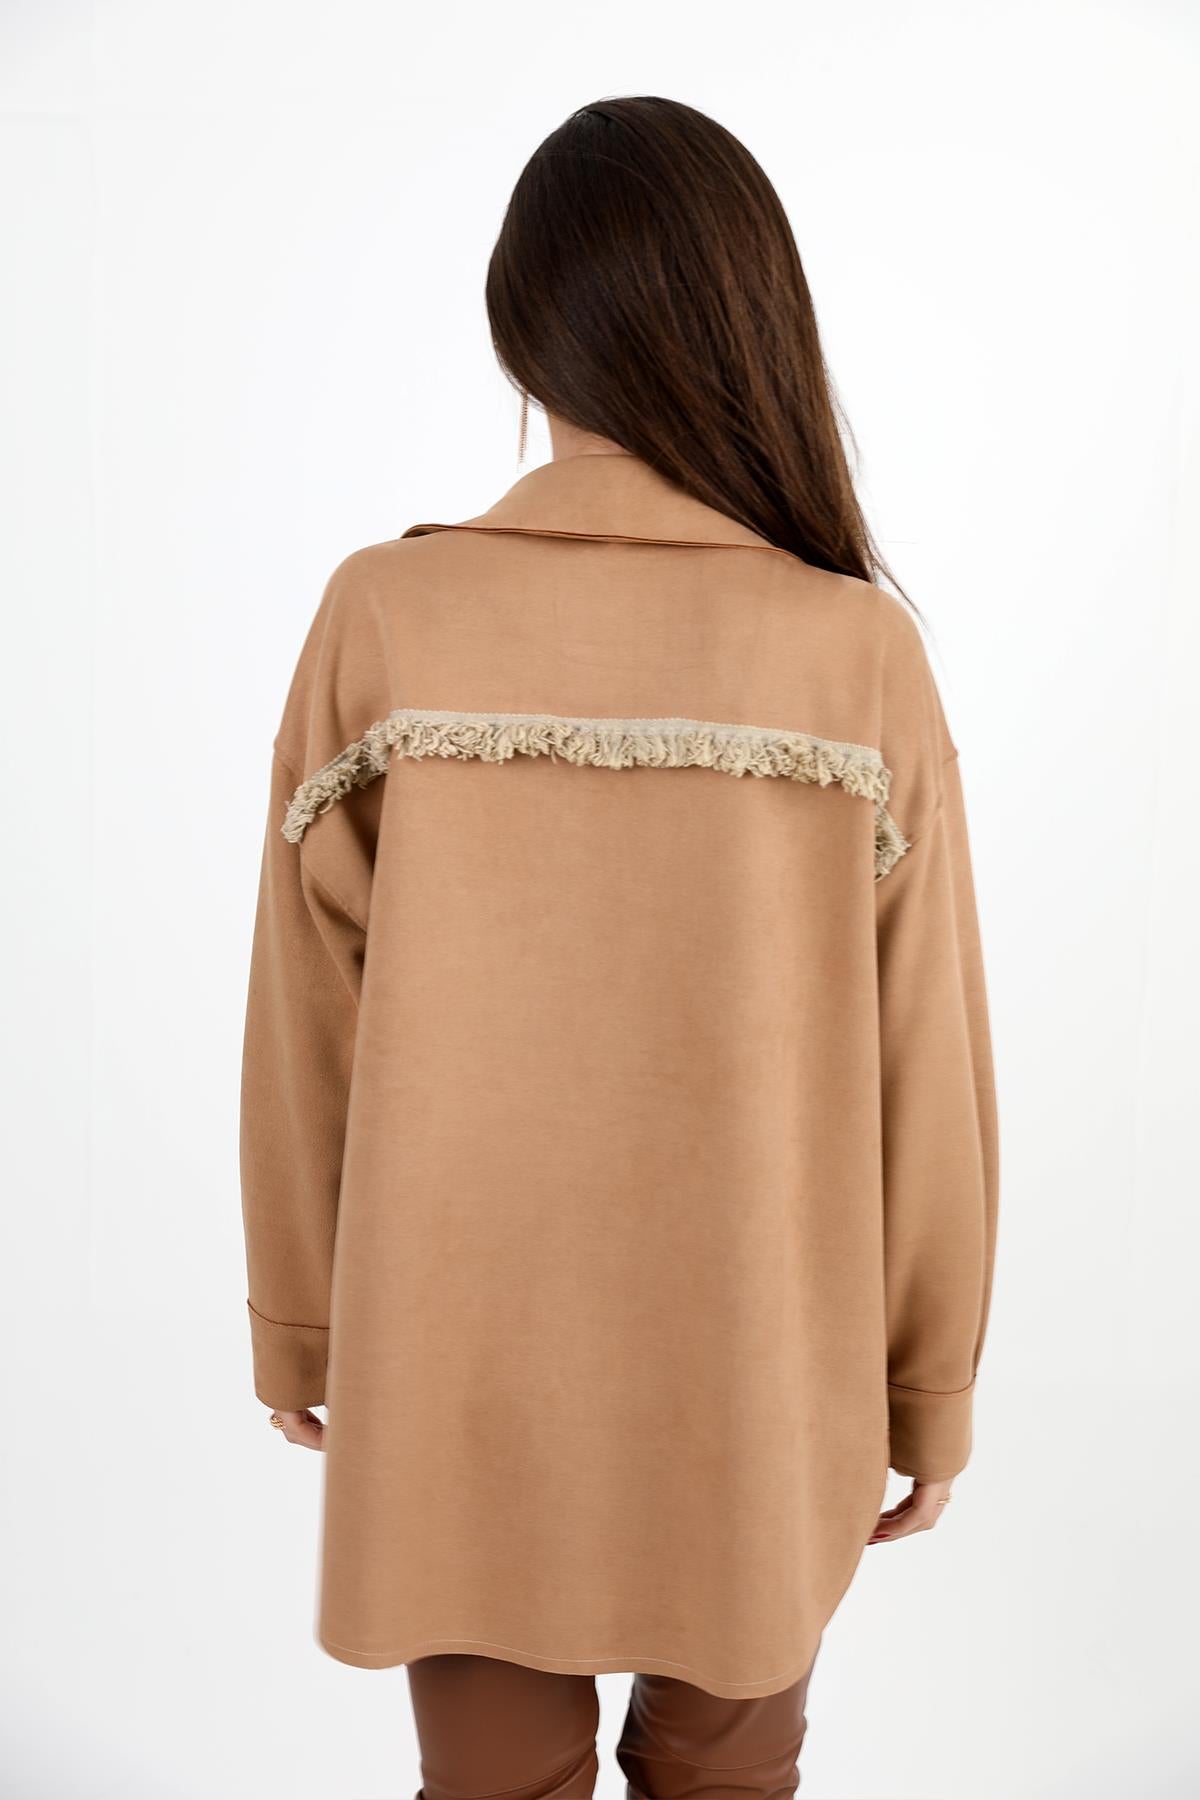 Women's Shirt Pocket Tasseled Embroidered Suede - Camel - STREETMODE ™